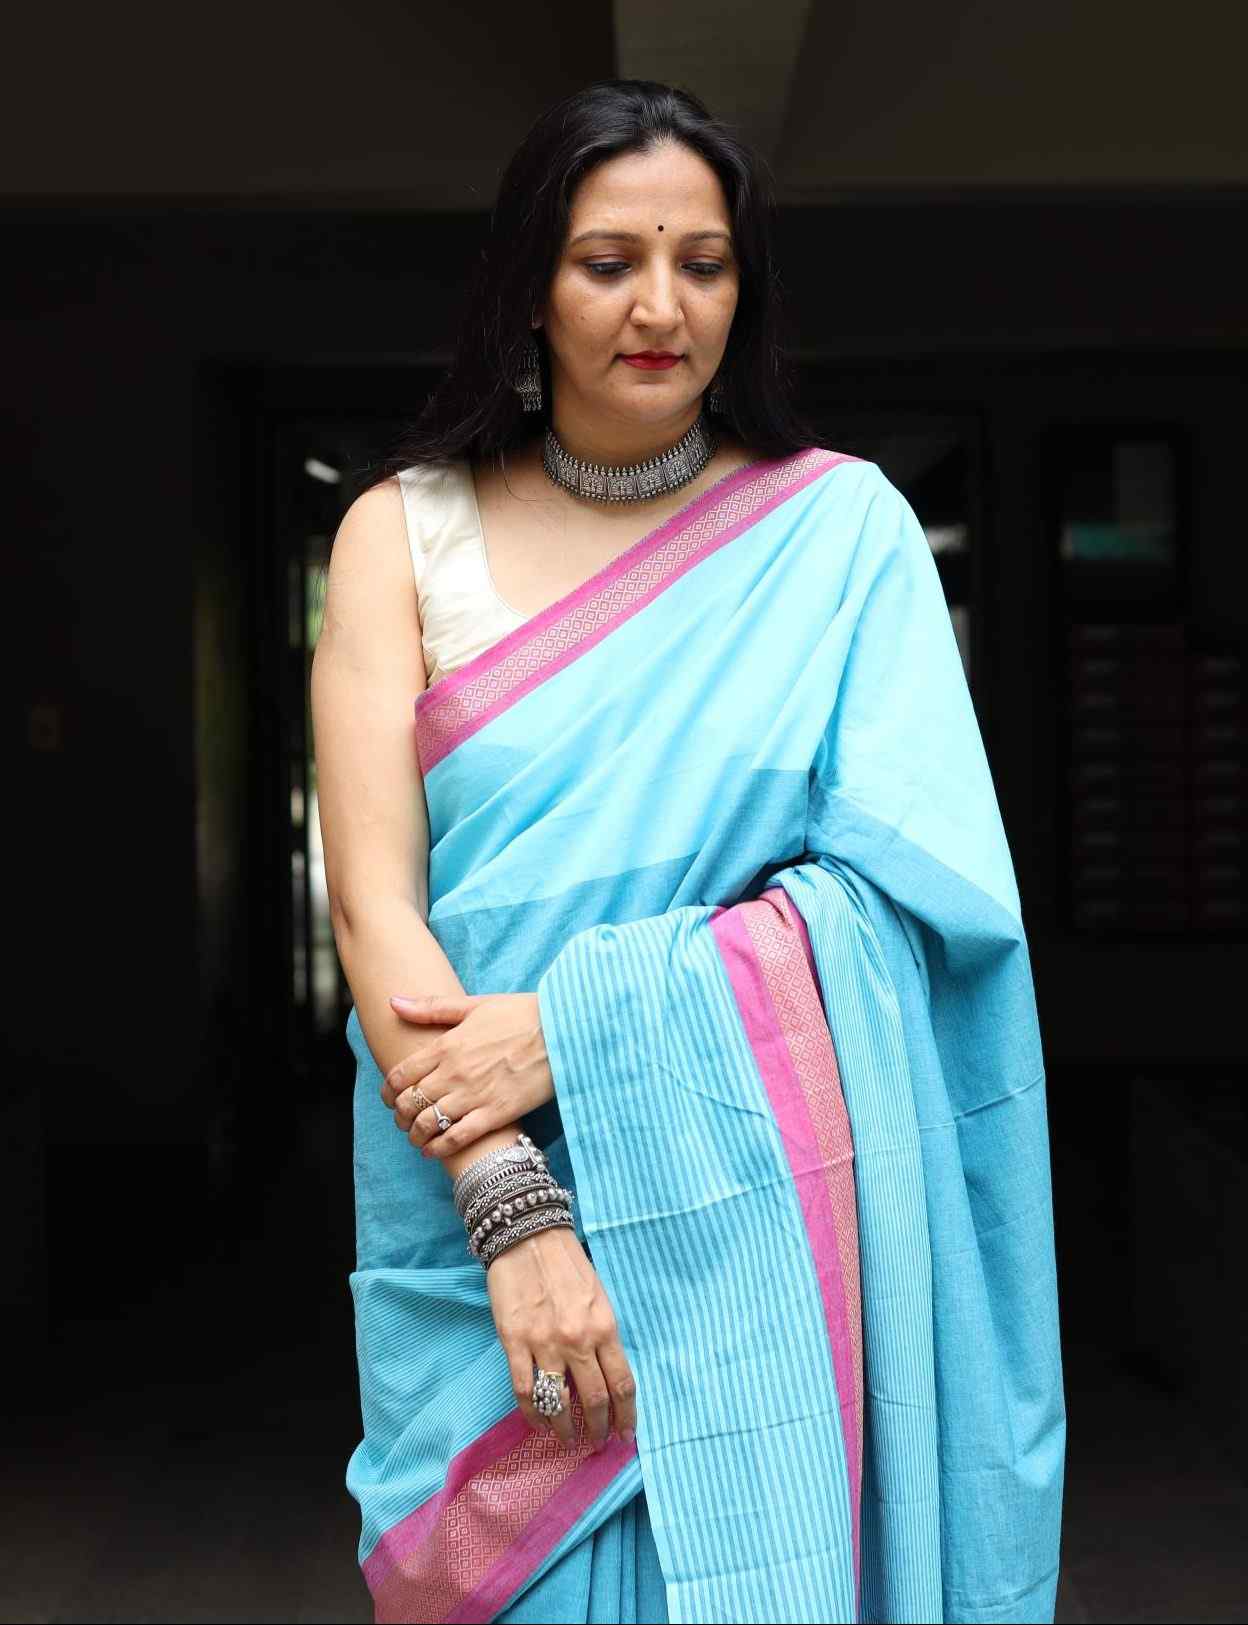 Turquoise Blue Saree with Pink Border